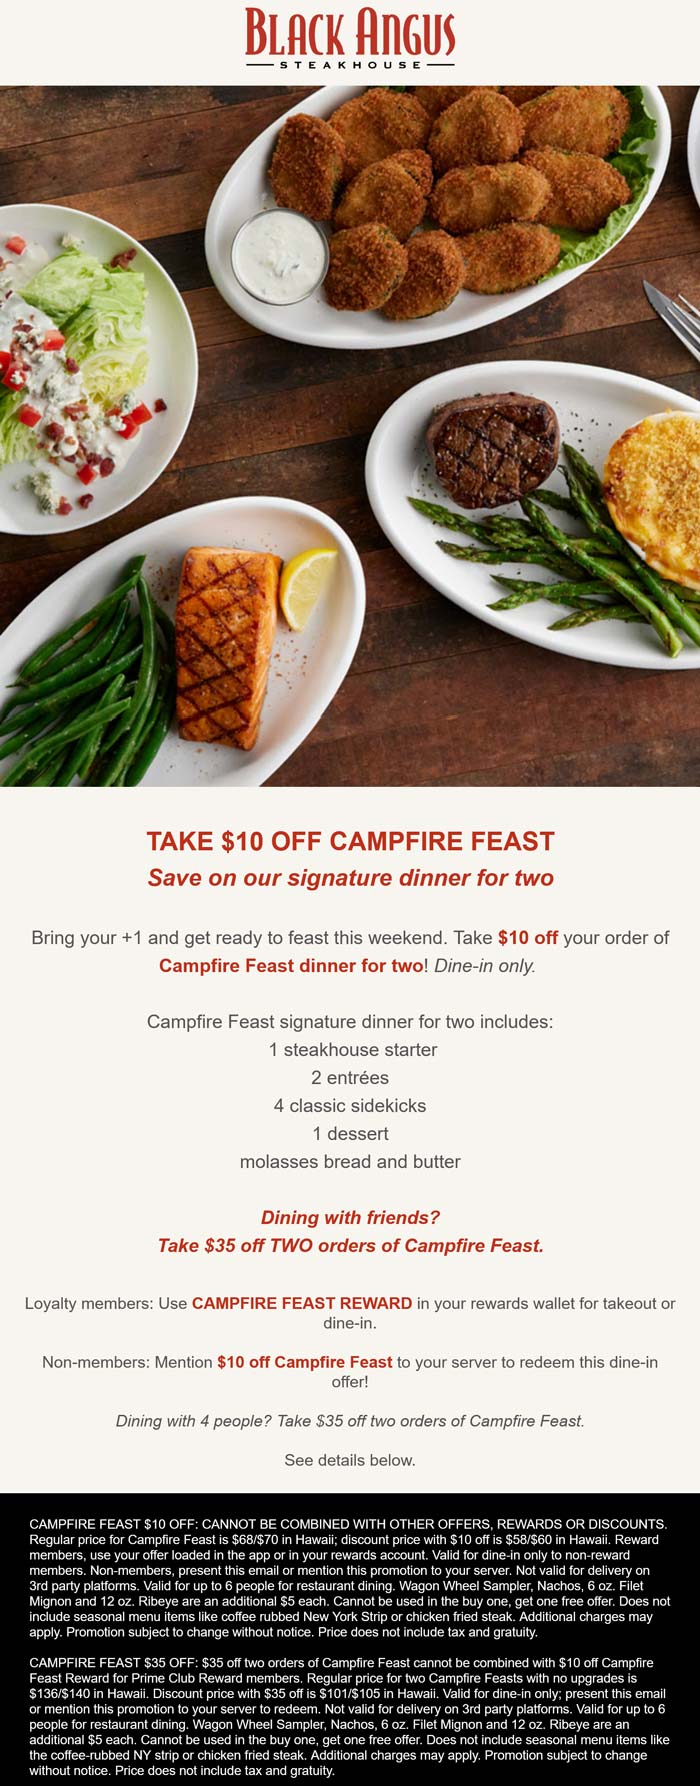 Black Angus restaurants Coupon  $10-$35 off your campfire feast of 2 entrees + starter + 4 sides + dessert at Black Angus steakhouse #blackangus 